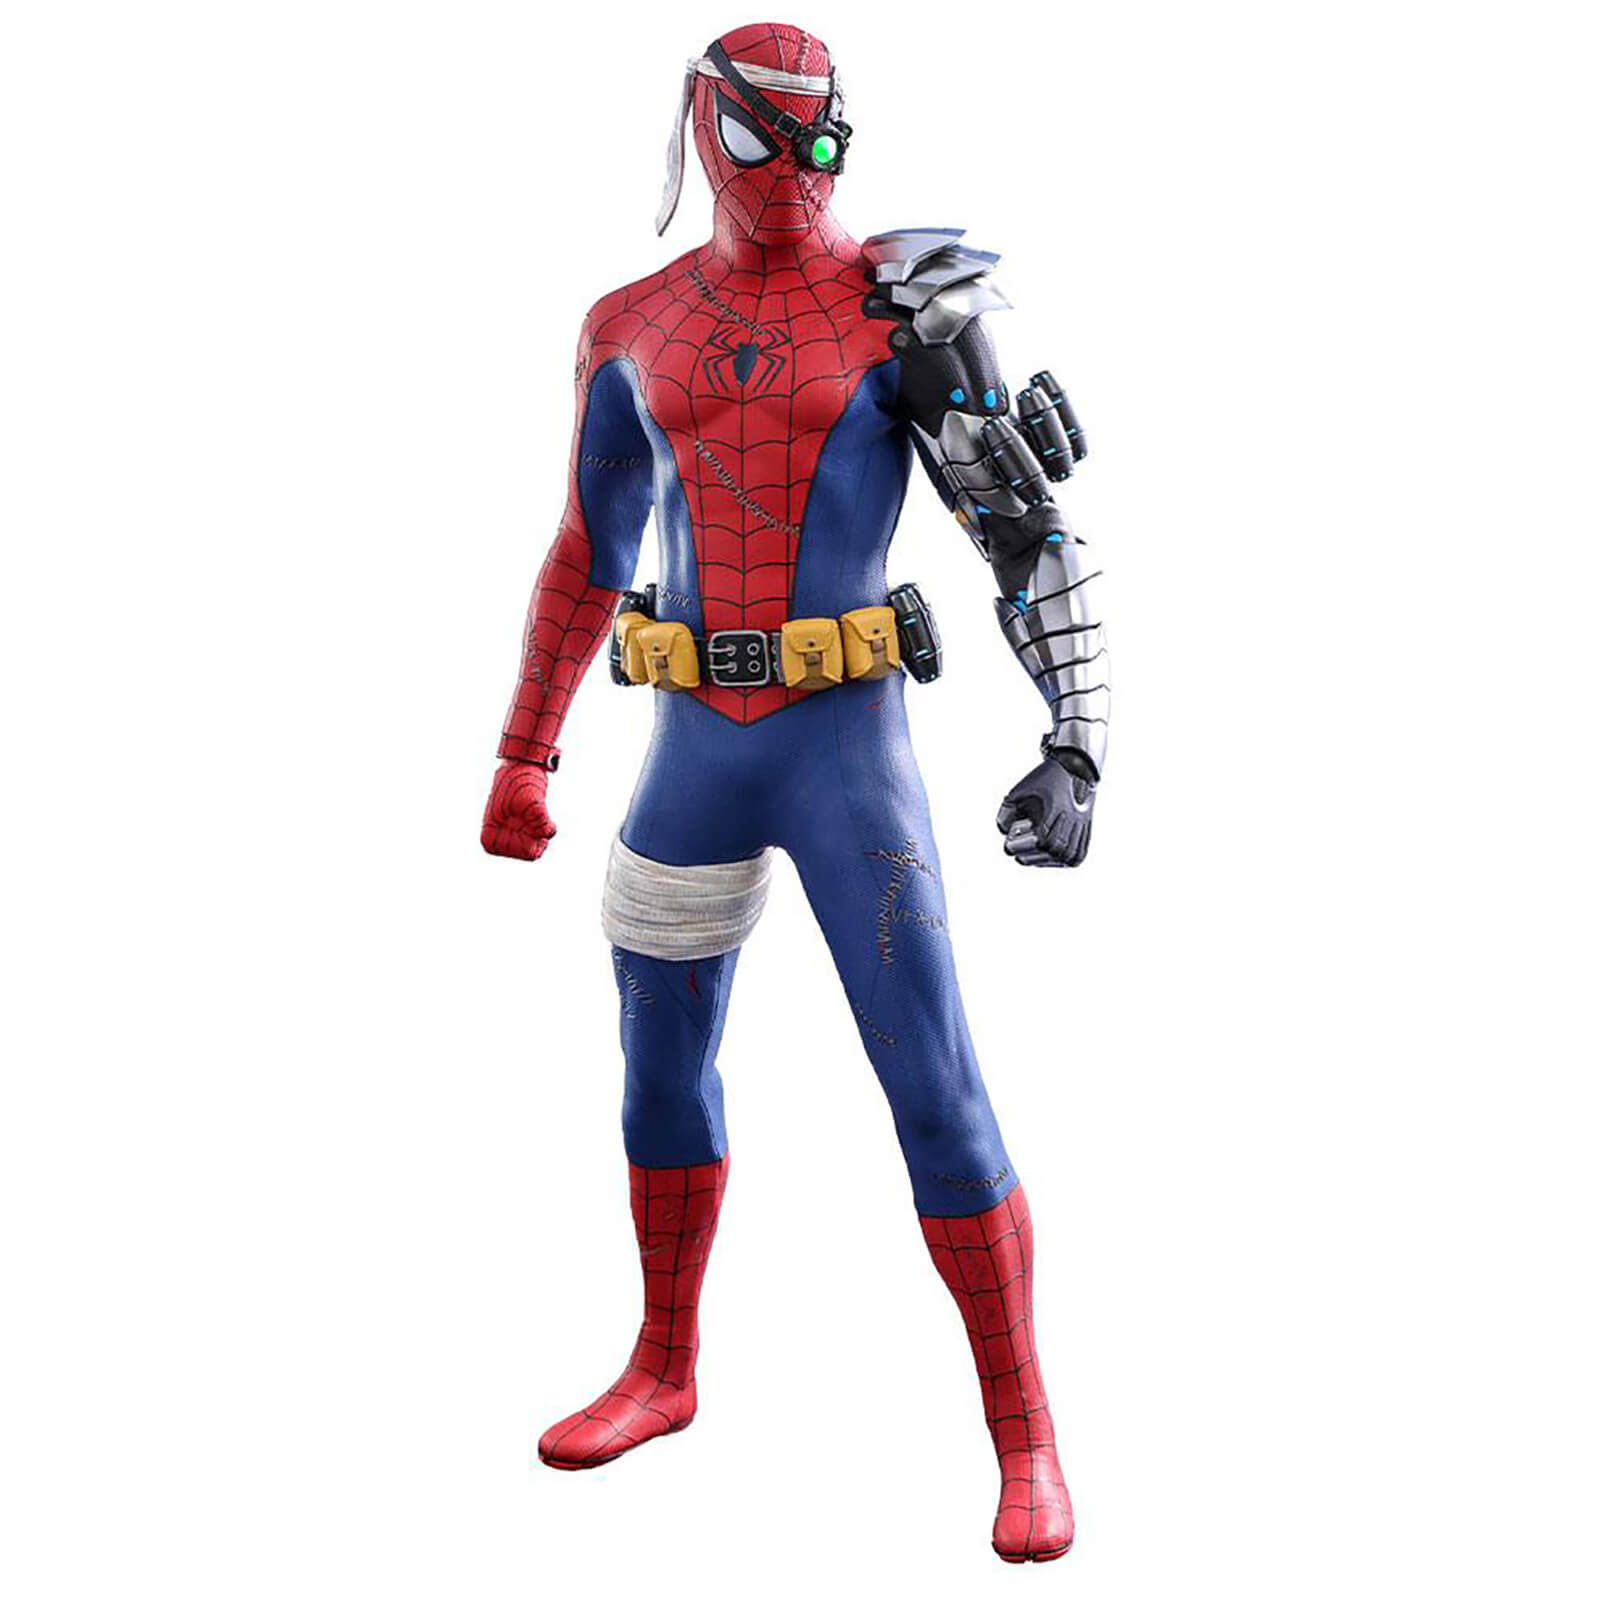 Image of Hot Toys Spider-Man Videogame Masterpiece Action Figure 1/6 Cyborg Spider-Man Suit 2021 Toy Fair Exclusive